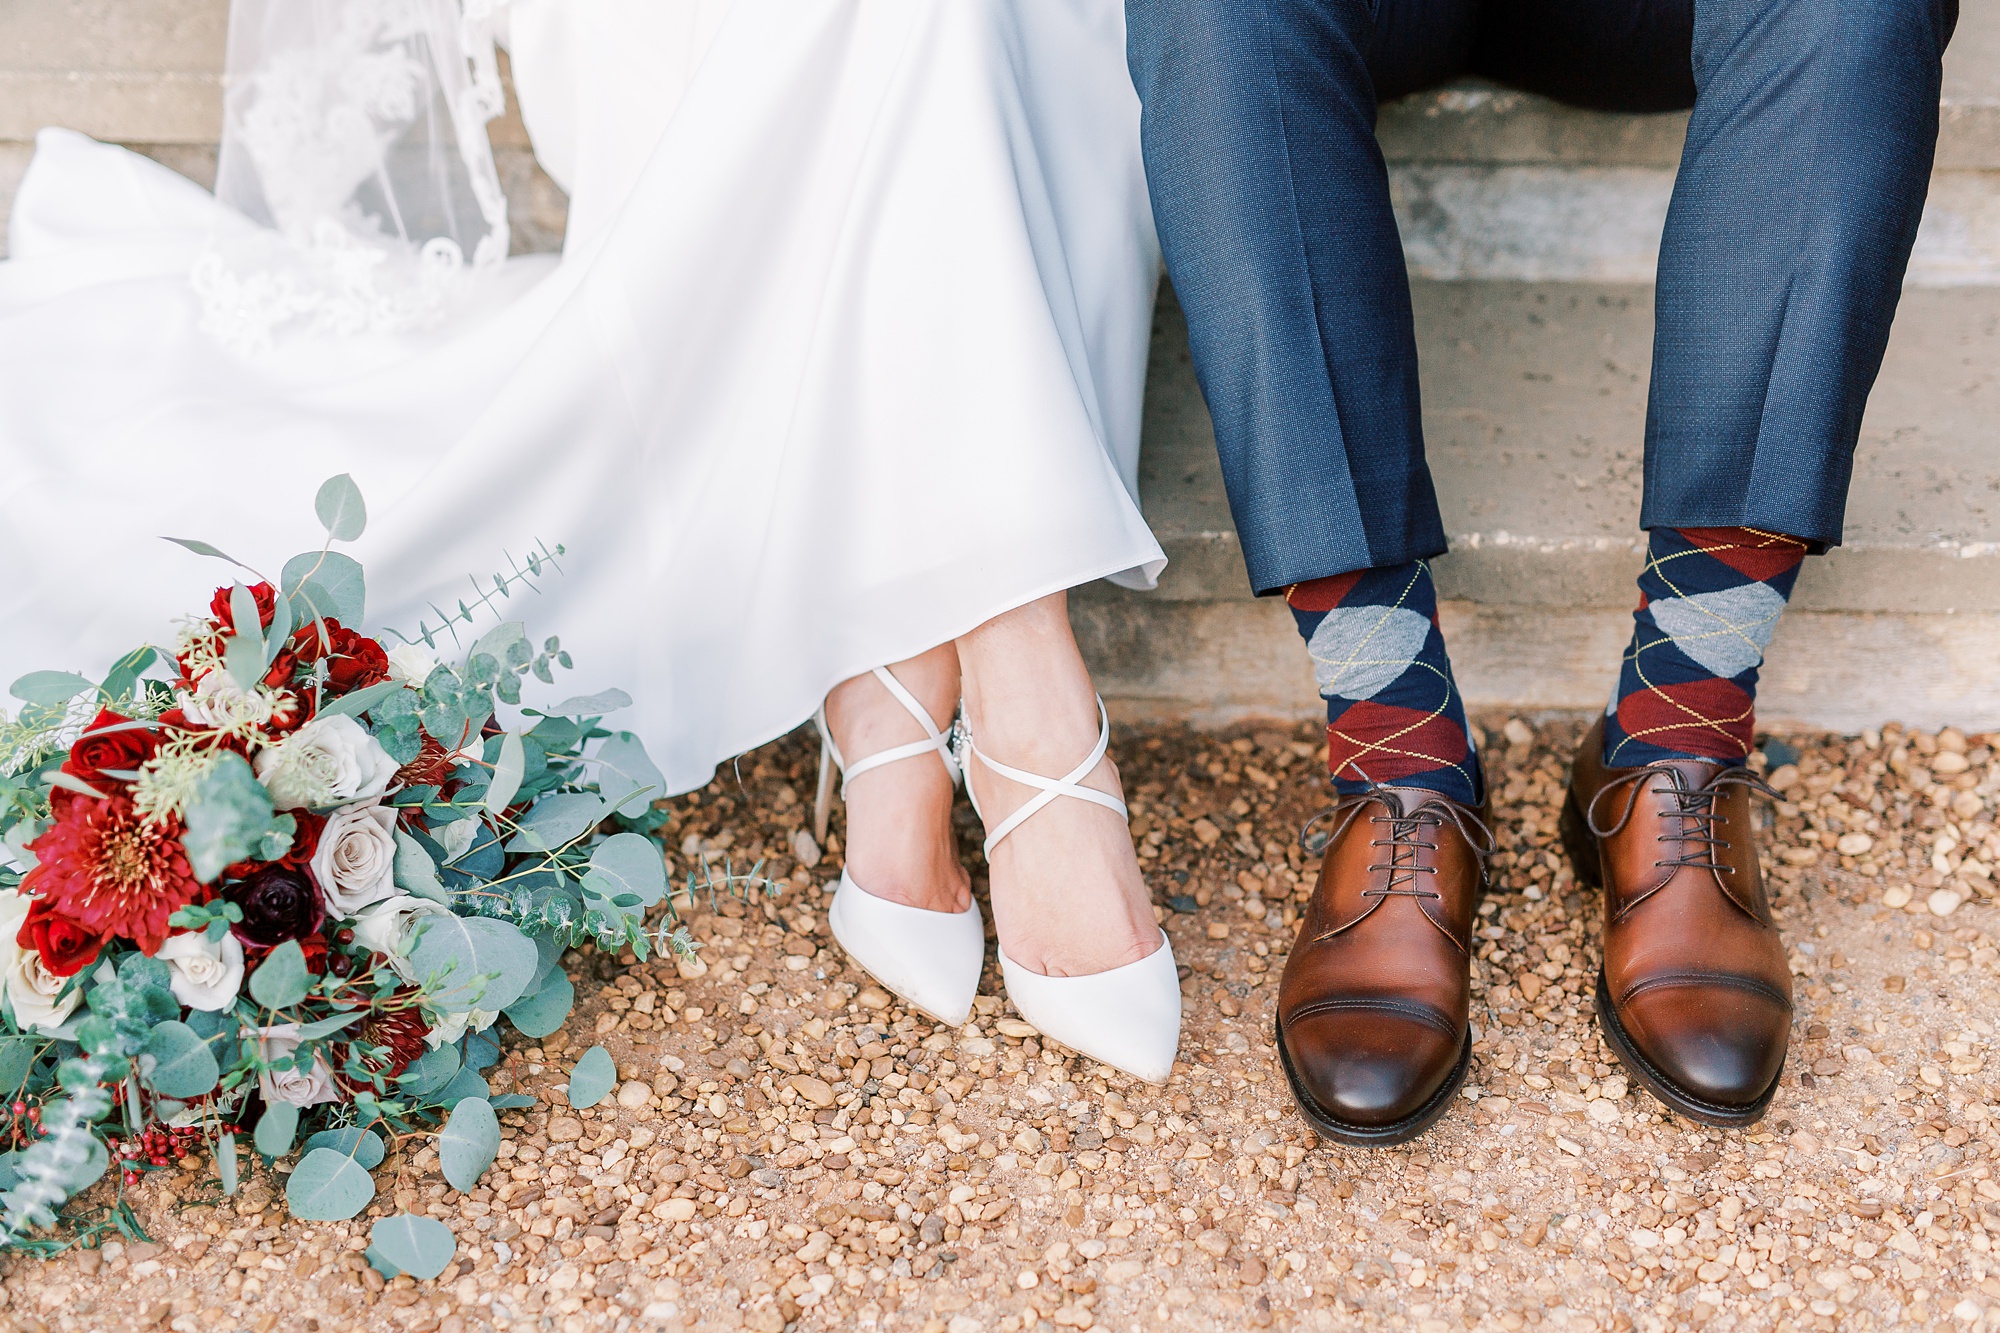 Intimate Andrews Farm elopement for couple with classic details in 2020